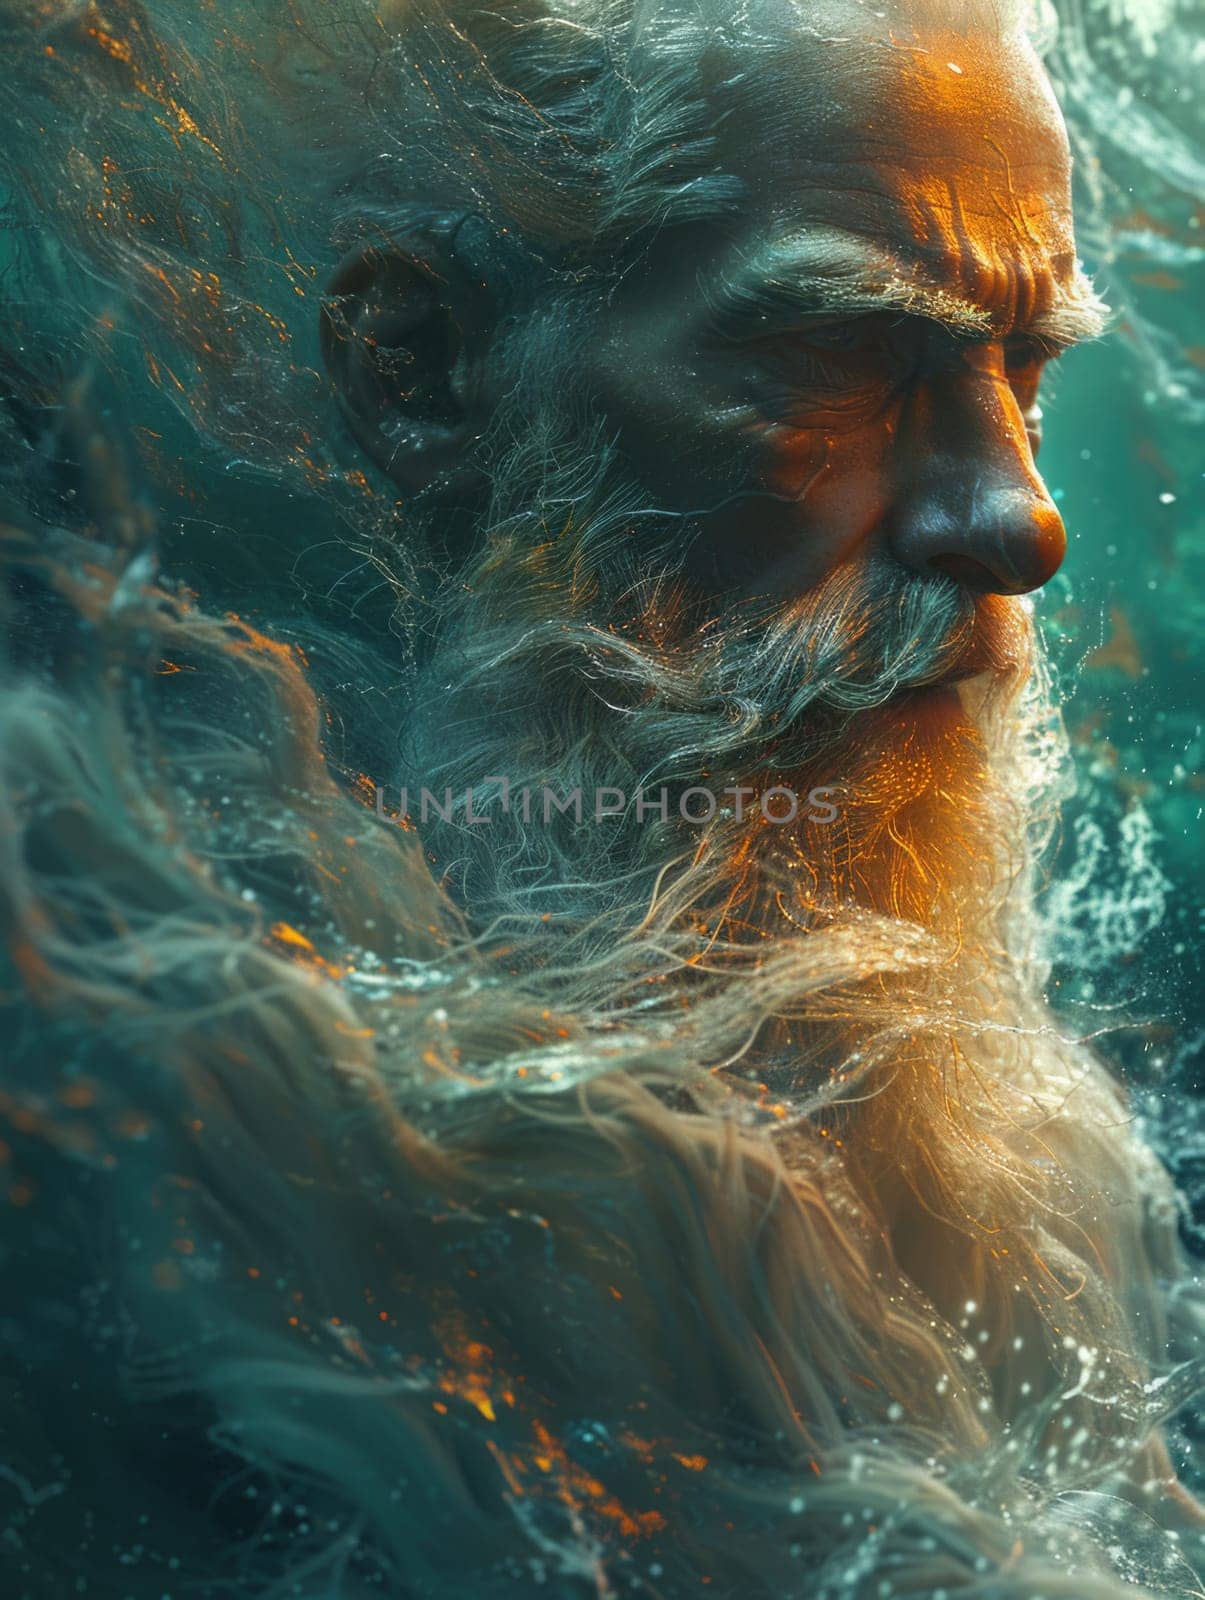 A man with a beard and long hair is standing in the water.